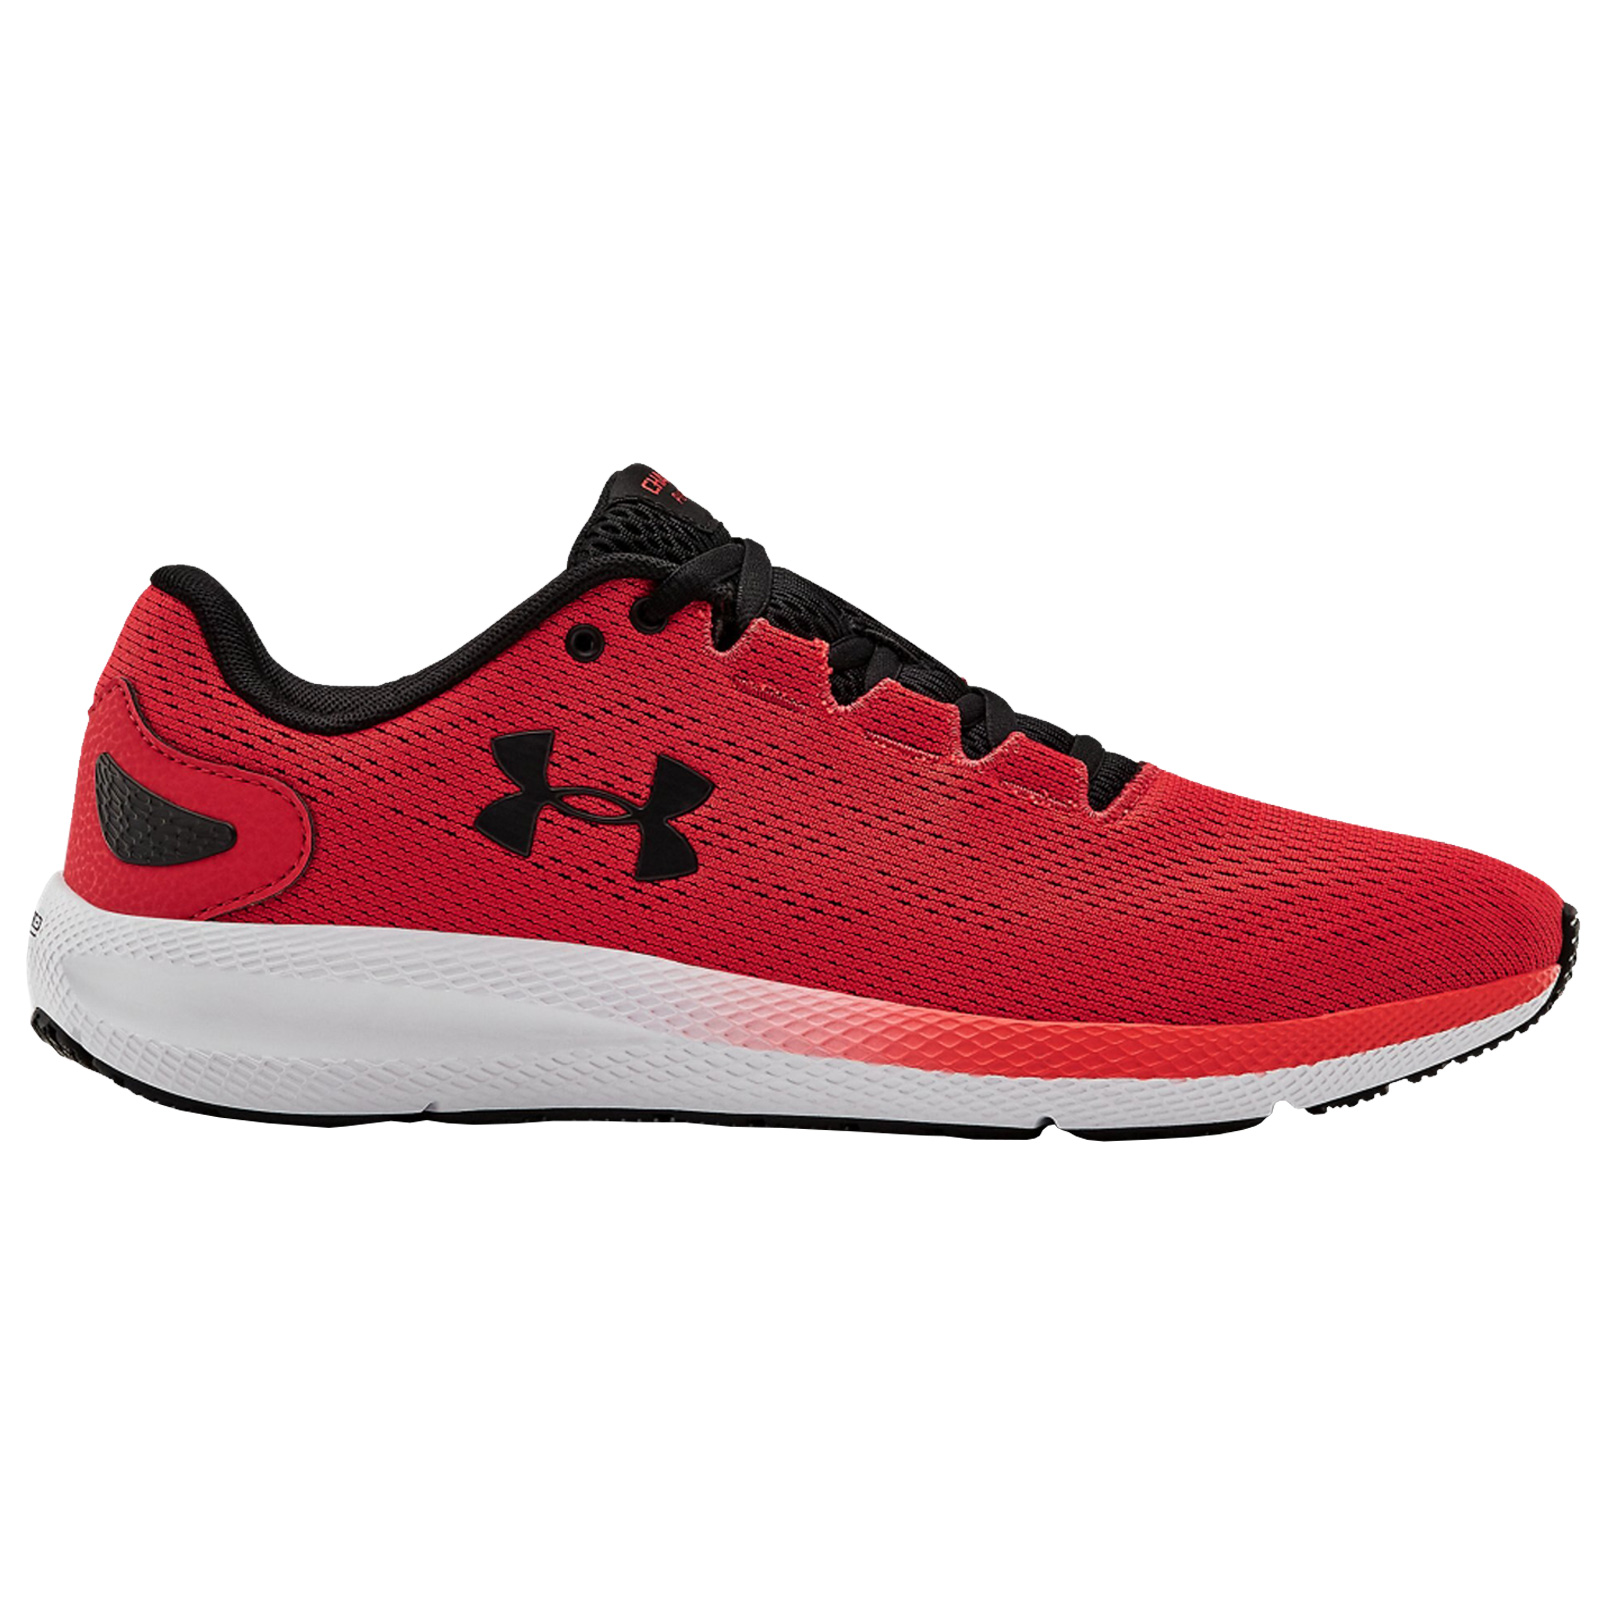 2020 Under Armour Mens Charged Pursuit 2 Trainers UA Gym Training ...